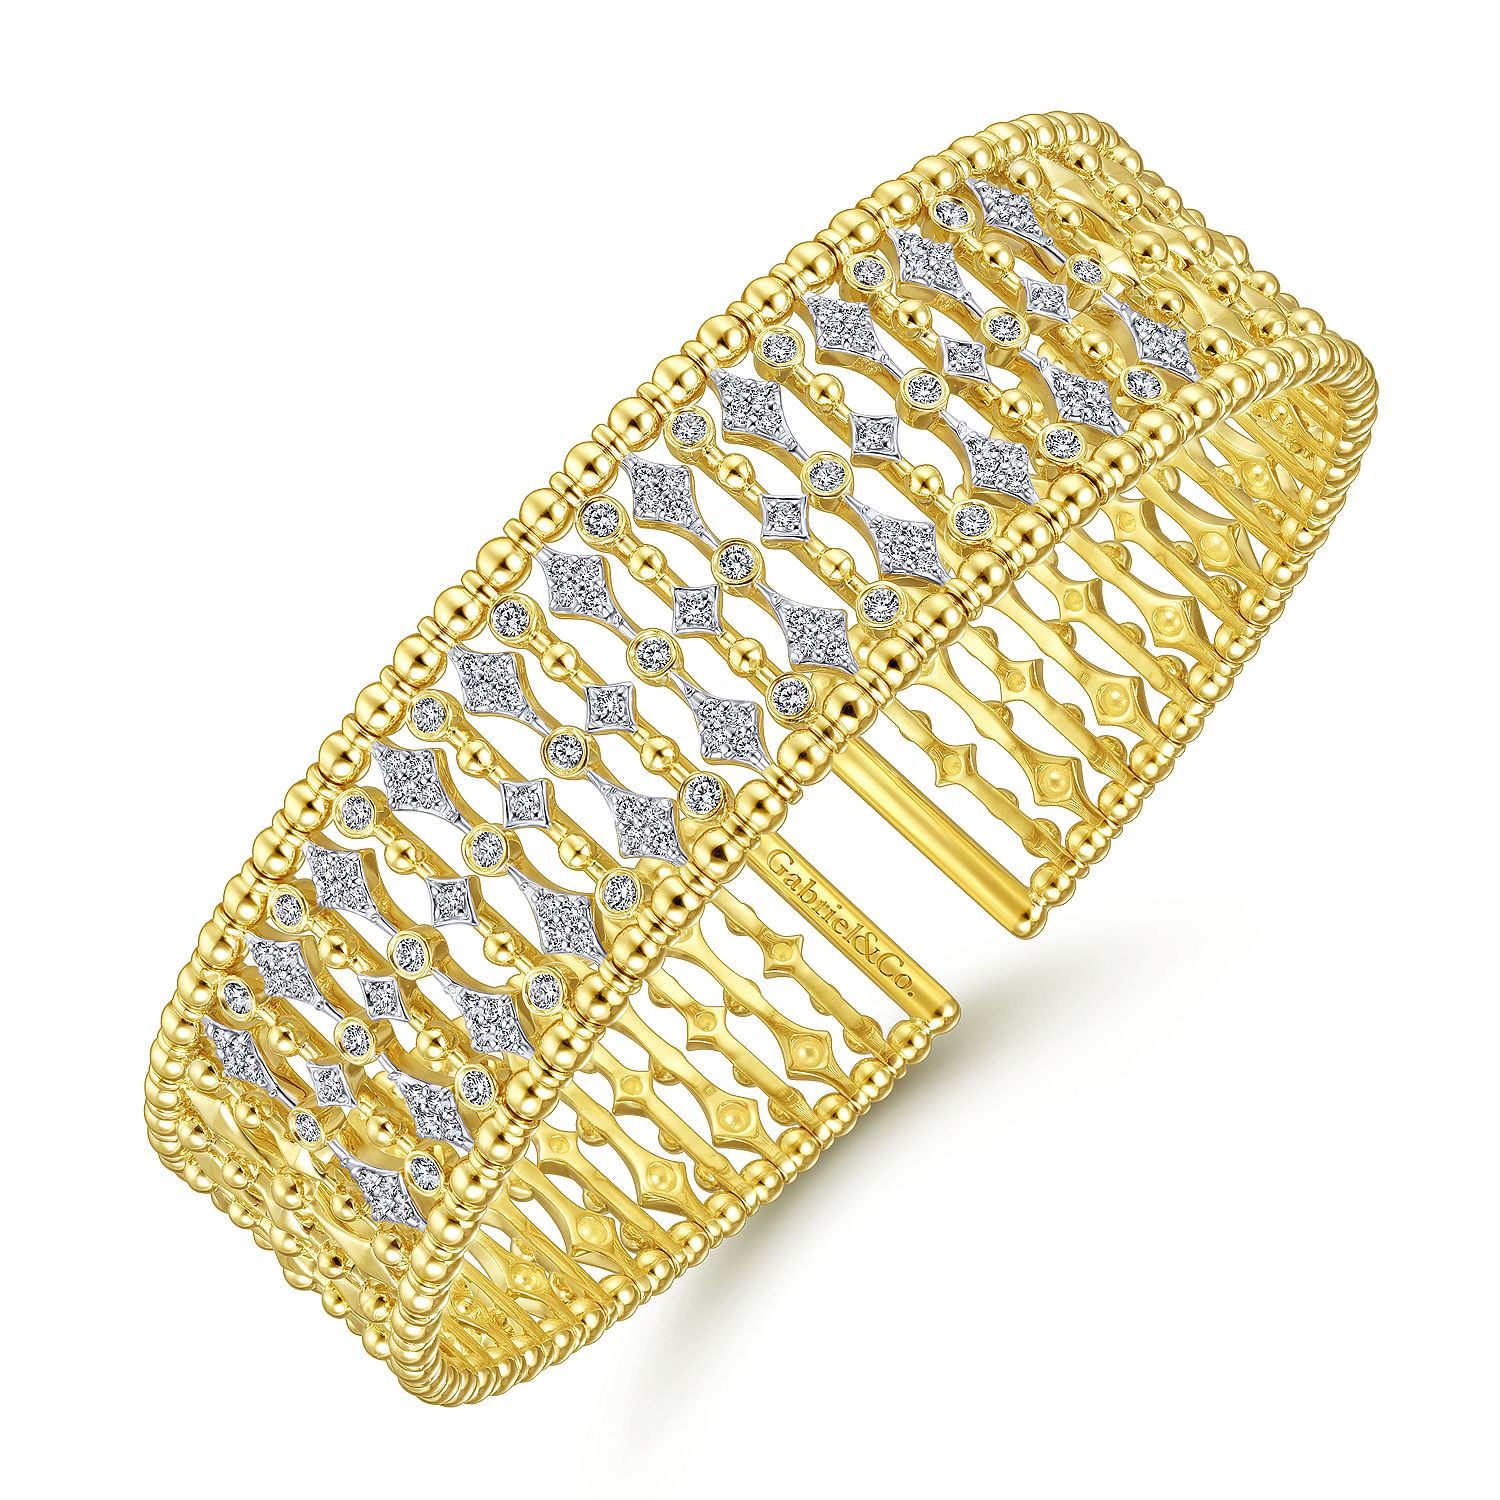 Wide 14K Yellow Gold Cage Cuff Bracelet with Diamond Stations